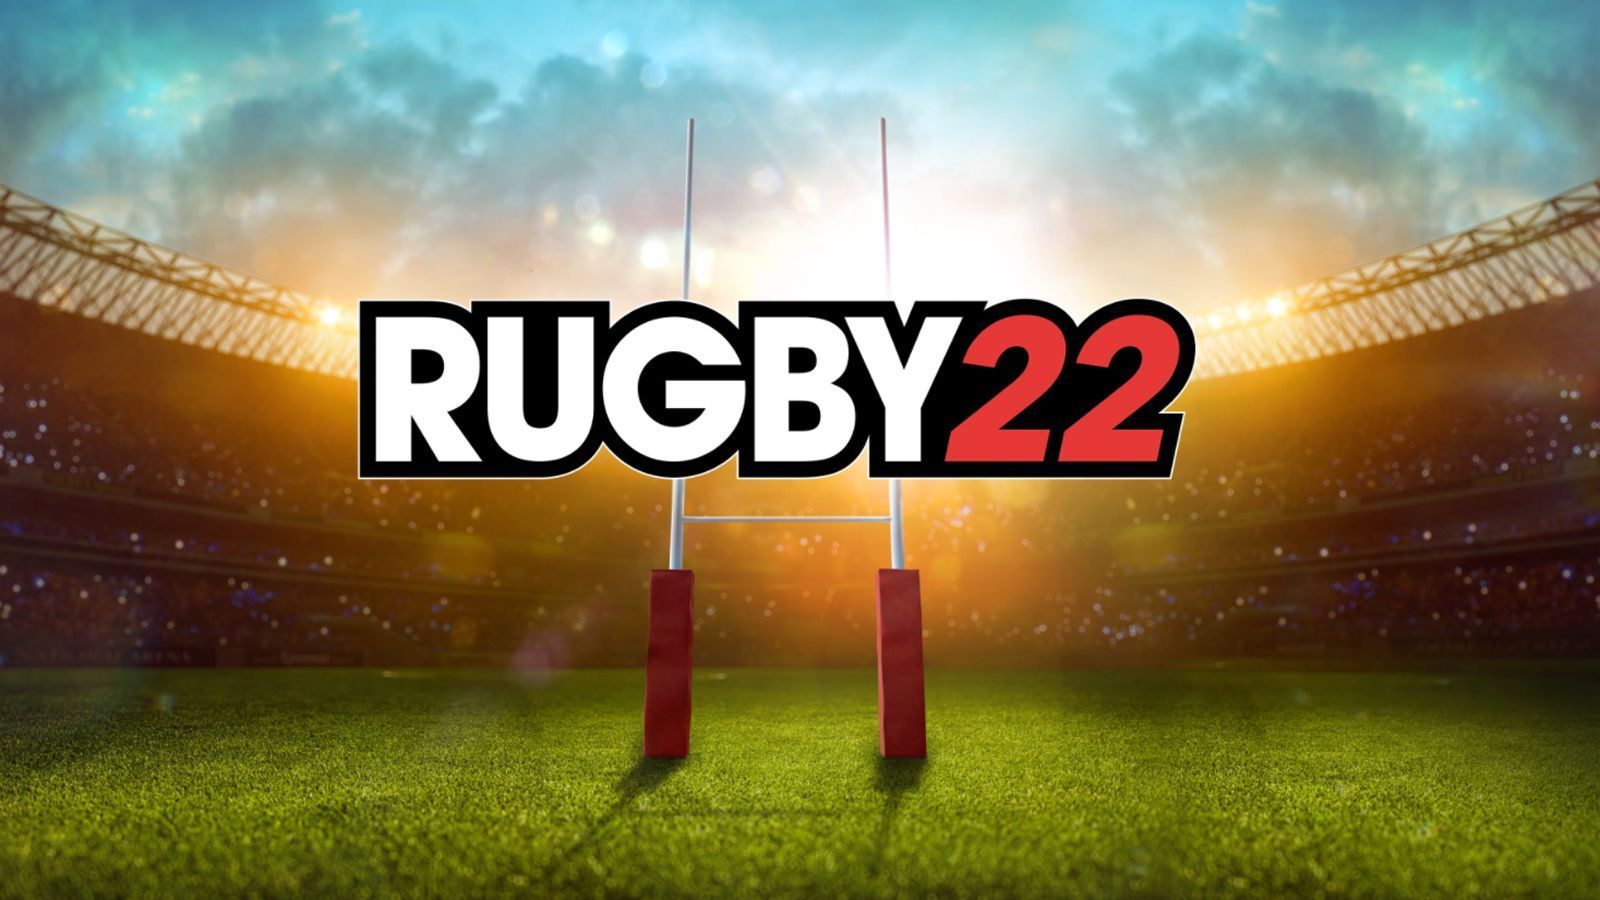 
                <strong>Rugby 22</strong><br>
                Geplanter Release: Januar 2022 |Sportart: Rugby |Plattformen: PC, PS5, PS4, XBOX Series X/S, XBOX One
              